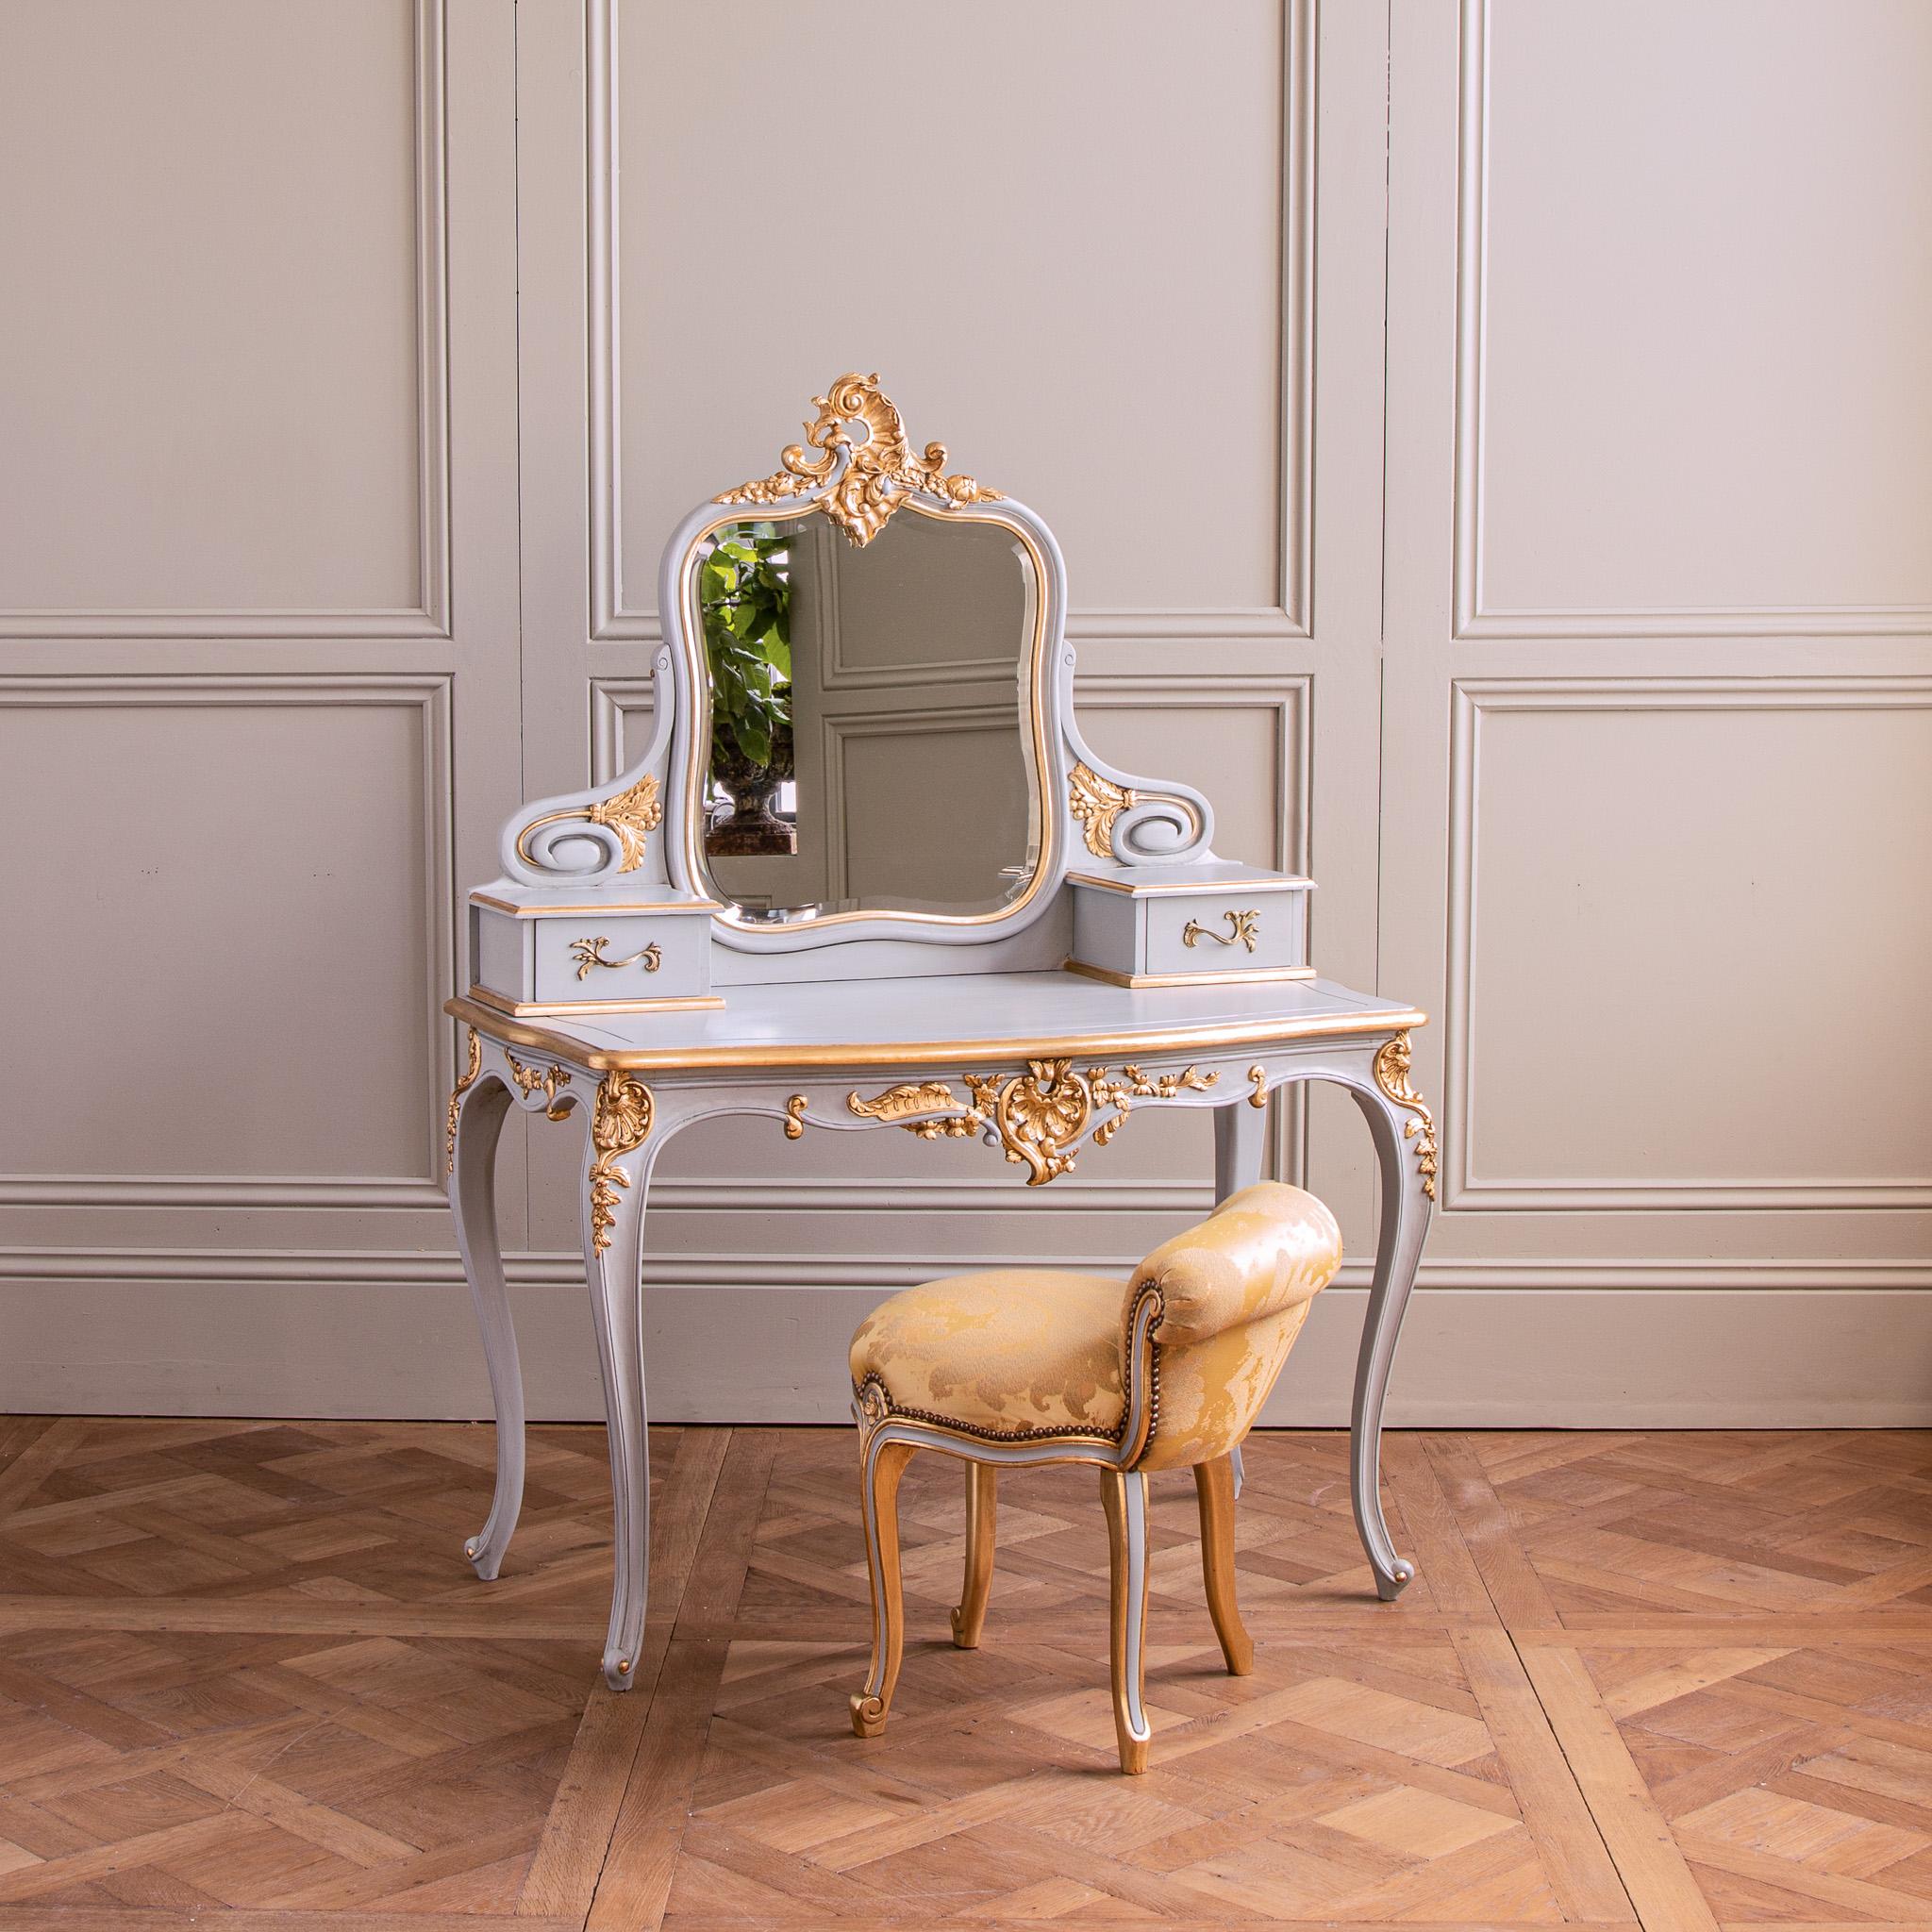 Made in the French LXV style, this dressing table has been hand carved in solid wood, featuring the ornamental shell of the Rococo period. The design integrates a large adjustable mirror with two side drawers featuring aged bronze handles which have